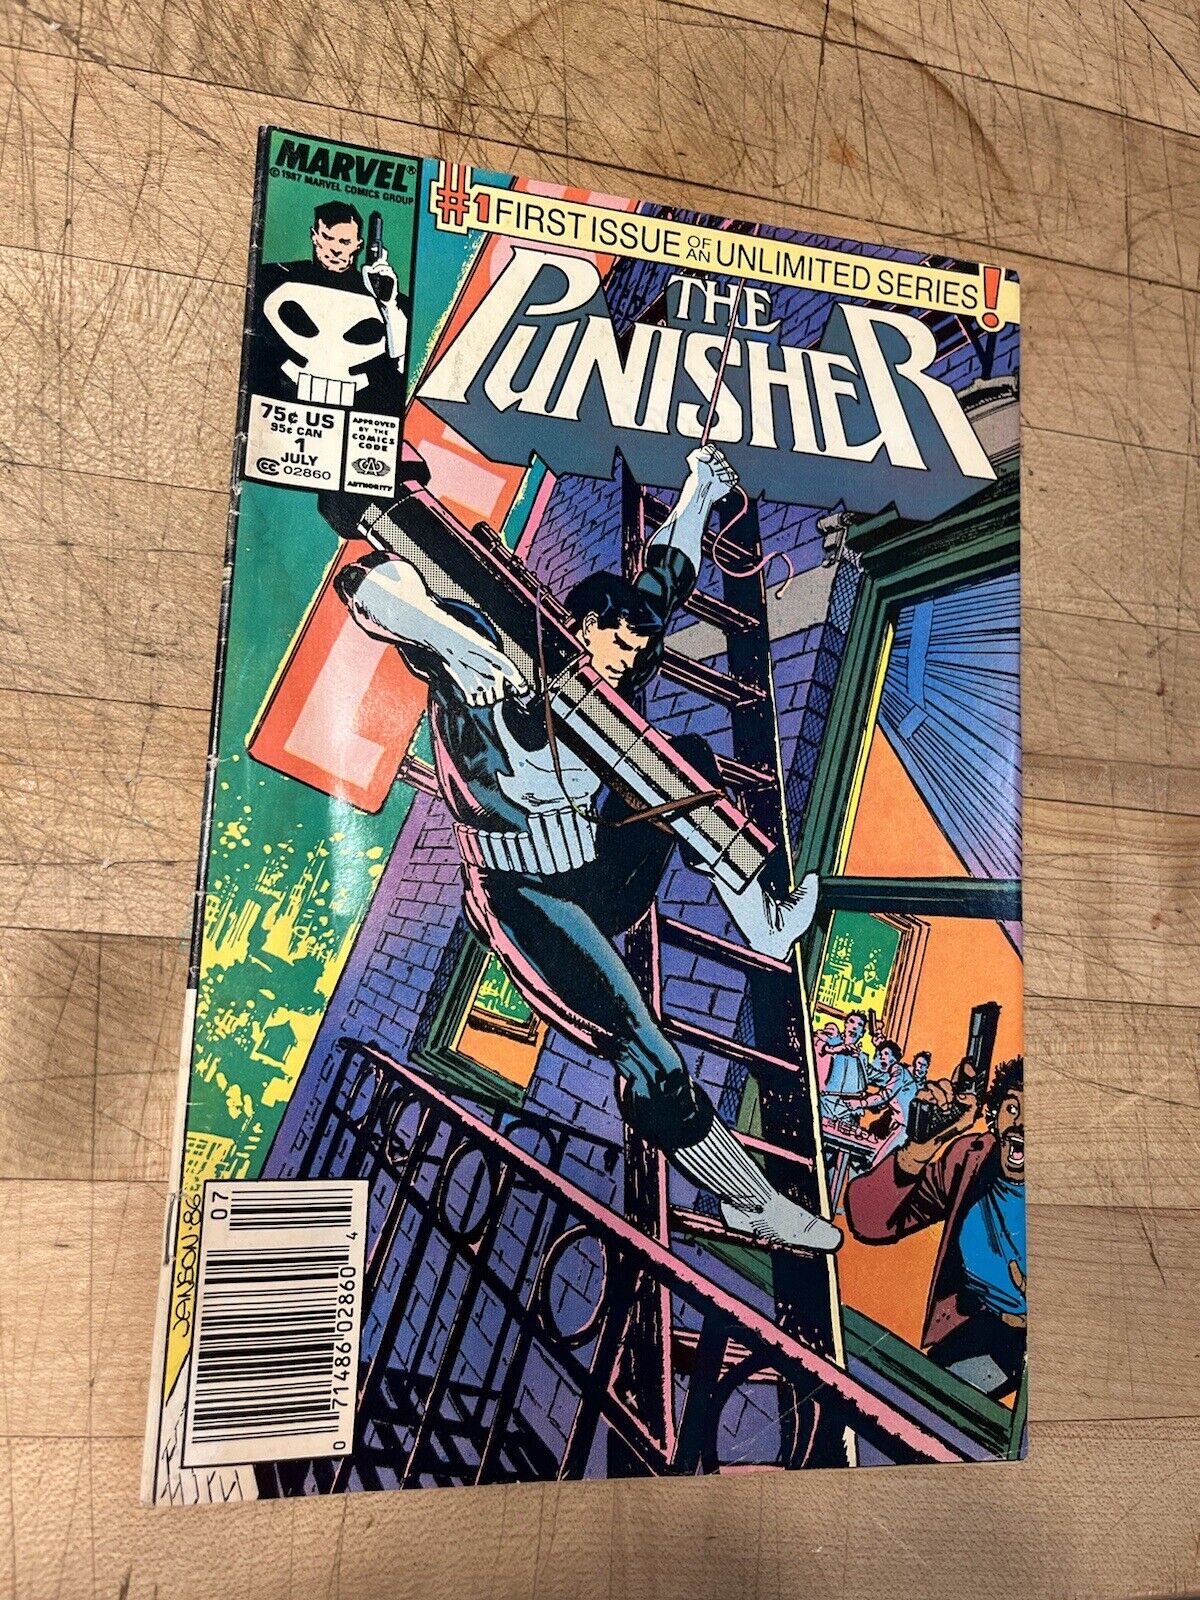 The Punisher #1 Marvel Comics 1st Issue Unlimited Series 1987 Newsstand